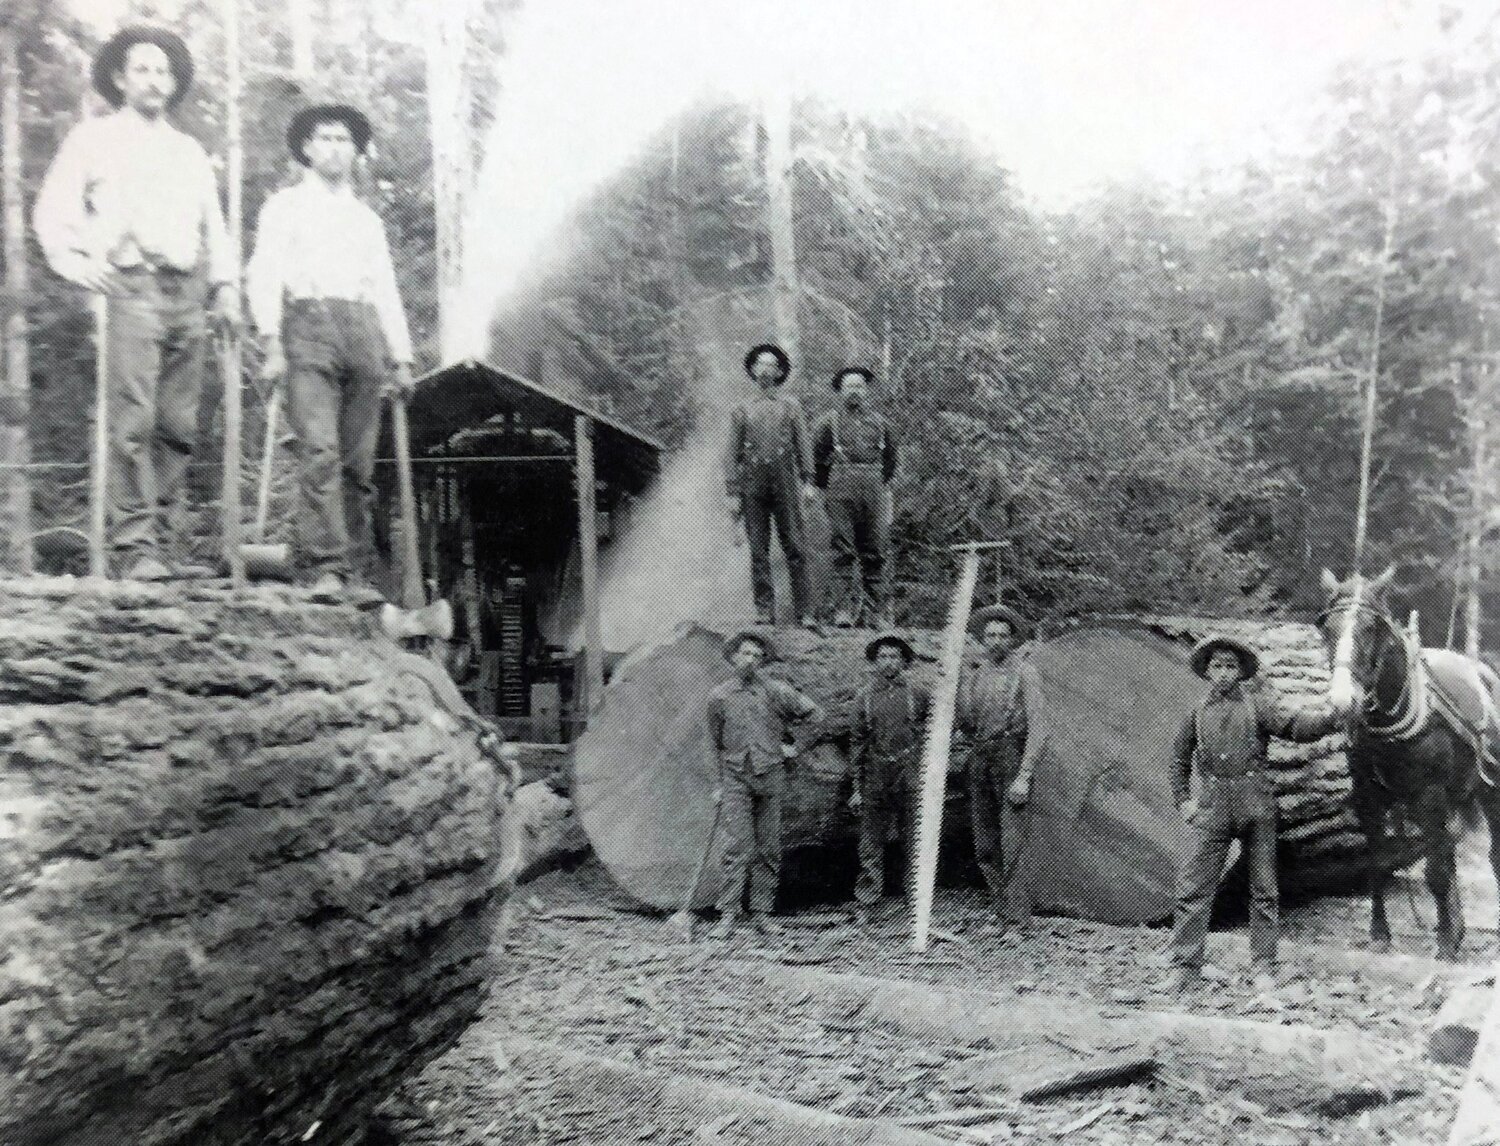 Brown Mill at Napavine is pictured in 1910. At left are Wendell Hammond and Jim Allison. In the background on the log are Thurston Reynolds and Arthur Brown. Below them are an unknown person, John Johnson, Emil Lentz and Charles Lentz (with horse). The mill was founded by Carroll L. Brown, who came to Washington from Maine in 1877. The mill started out at 5,000 feet and later expanded to 20,000 feet. Later it became known as Coal Creek Lumber Company. This photo and information was originally submitted by Eric J. Wilson for Our Hometowns.